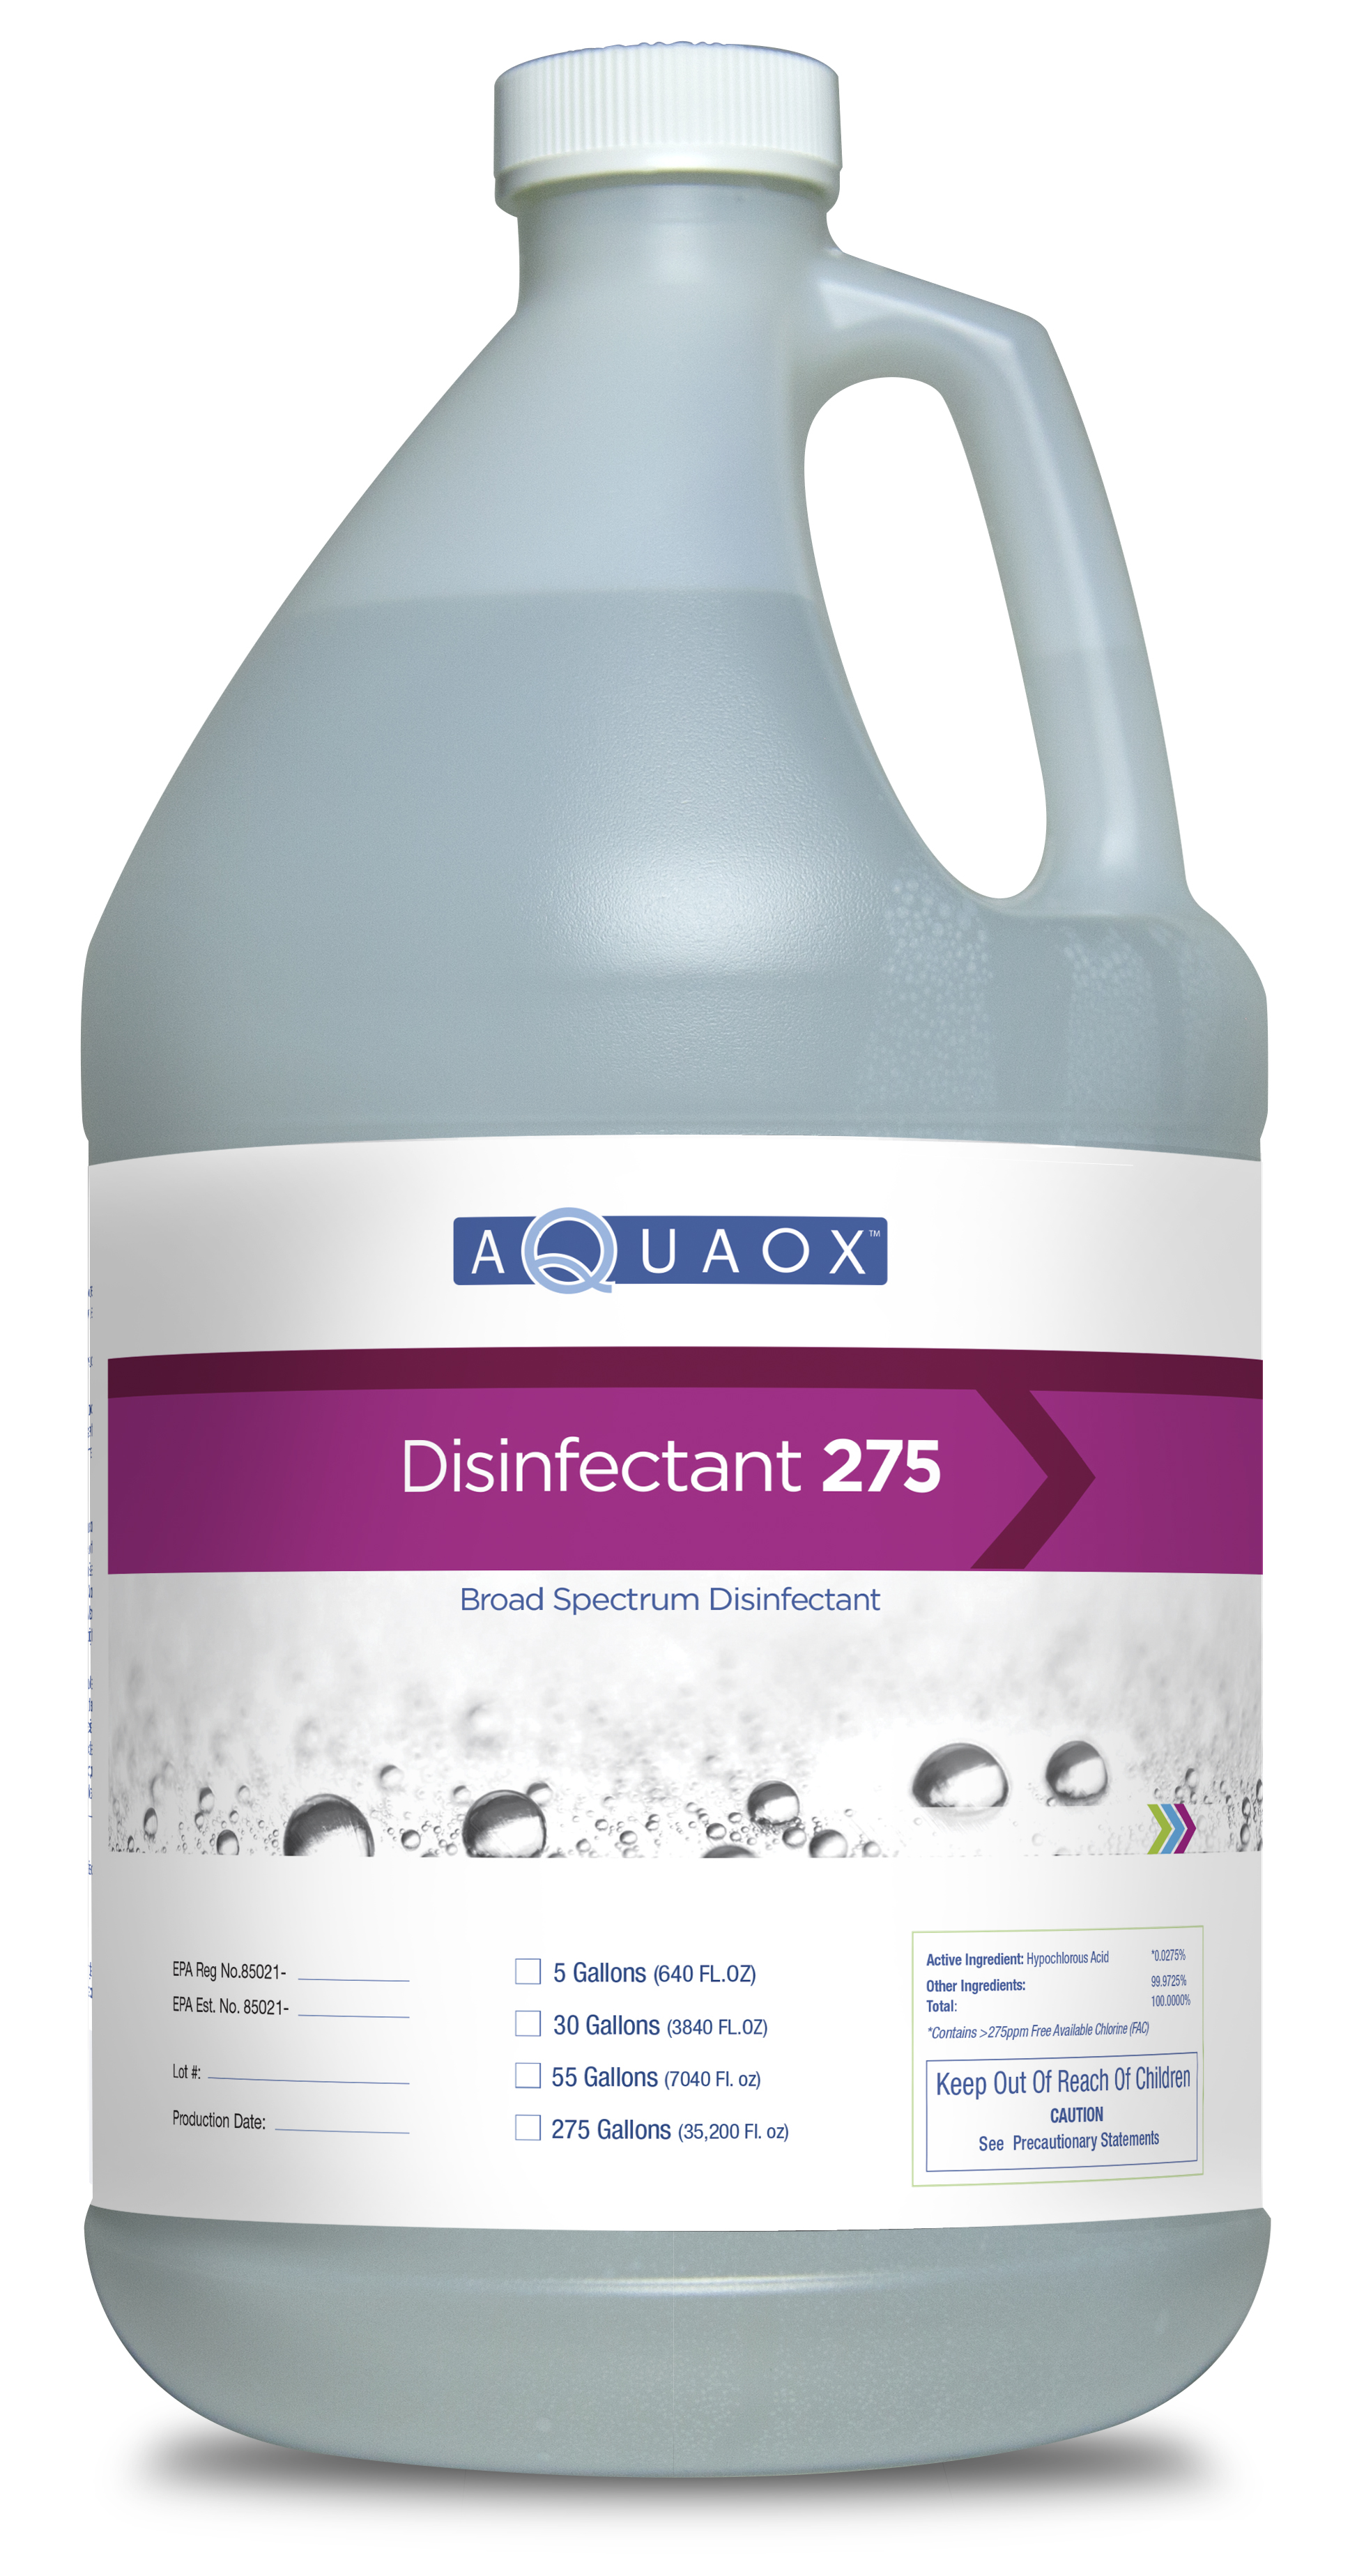 broad spectrum disinfectant, high level disinfectant, hospital grade disinfectant, surface disinfectant, dental clinic disinfectant, Medical office disinfectant, tattoo shop disinfectant